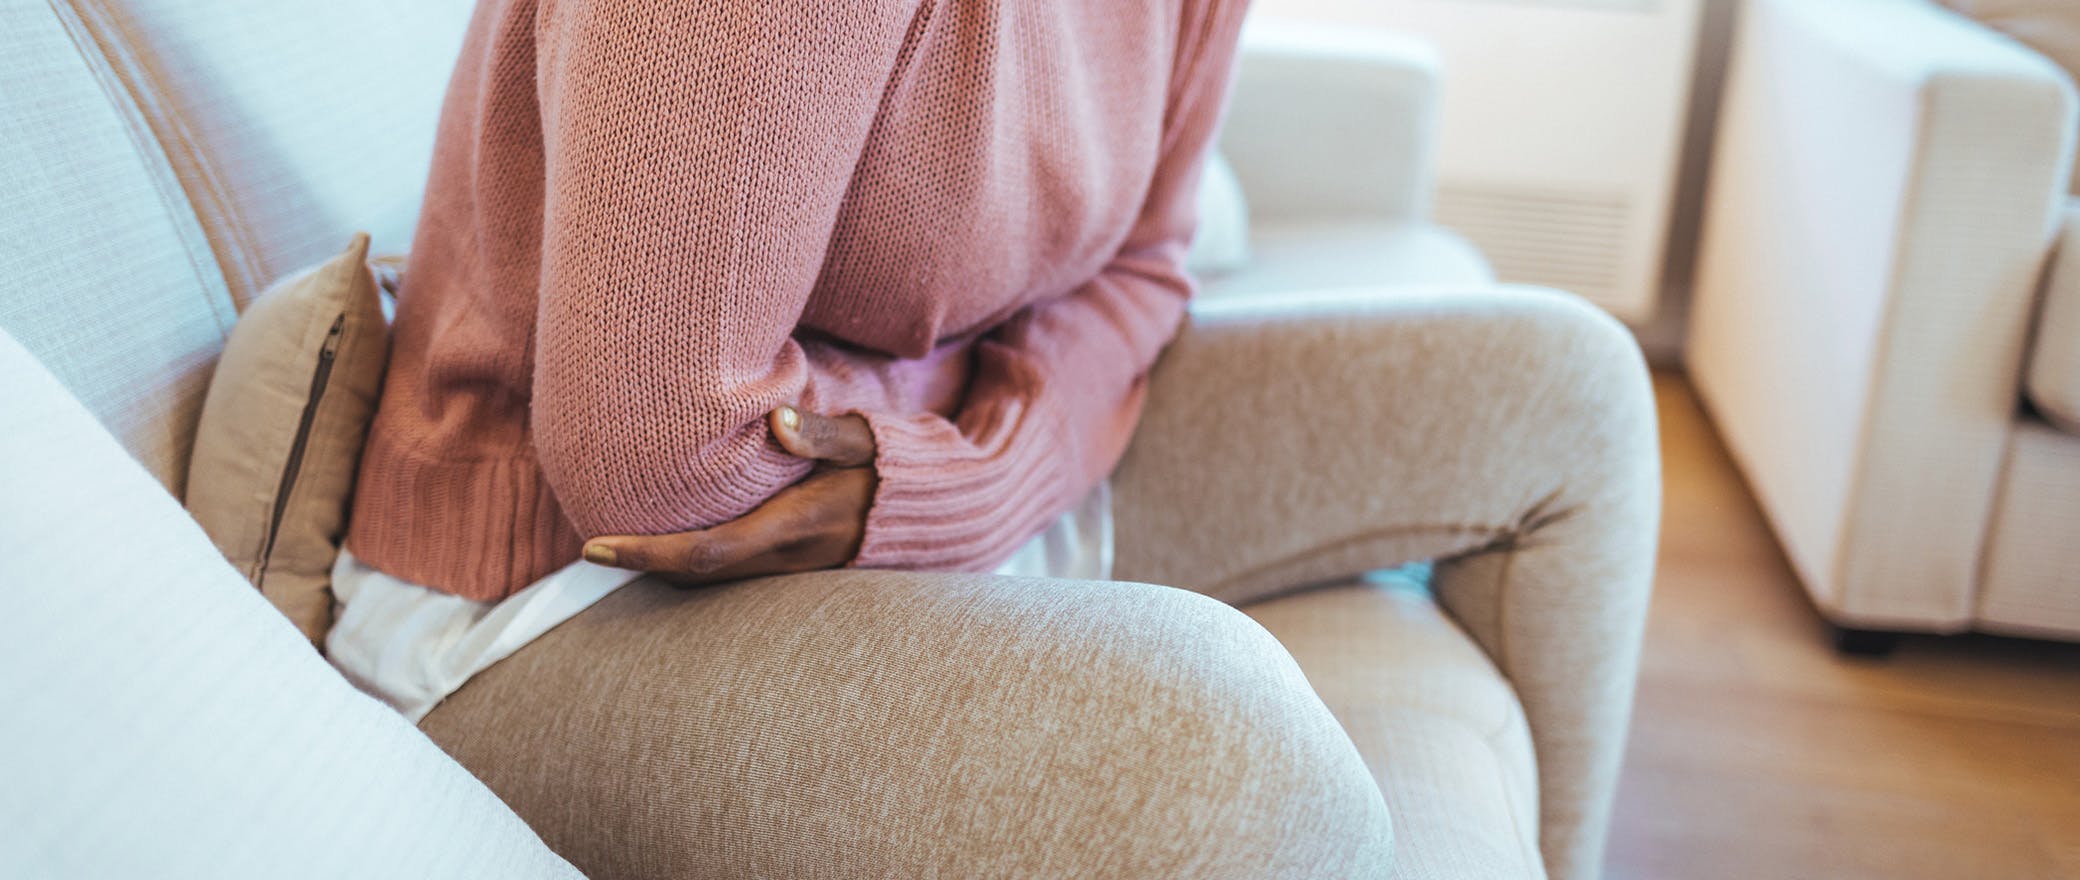 A woman is seated uncomfortably on a couch while she hugs her abdomen in pain.
